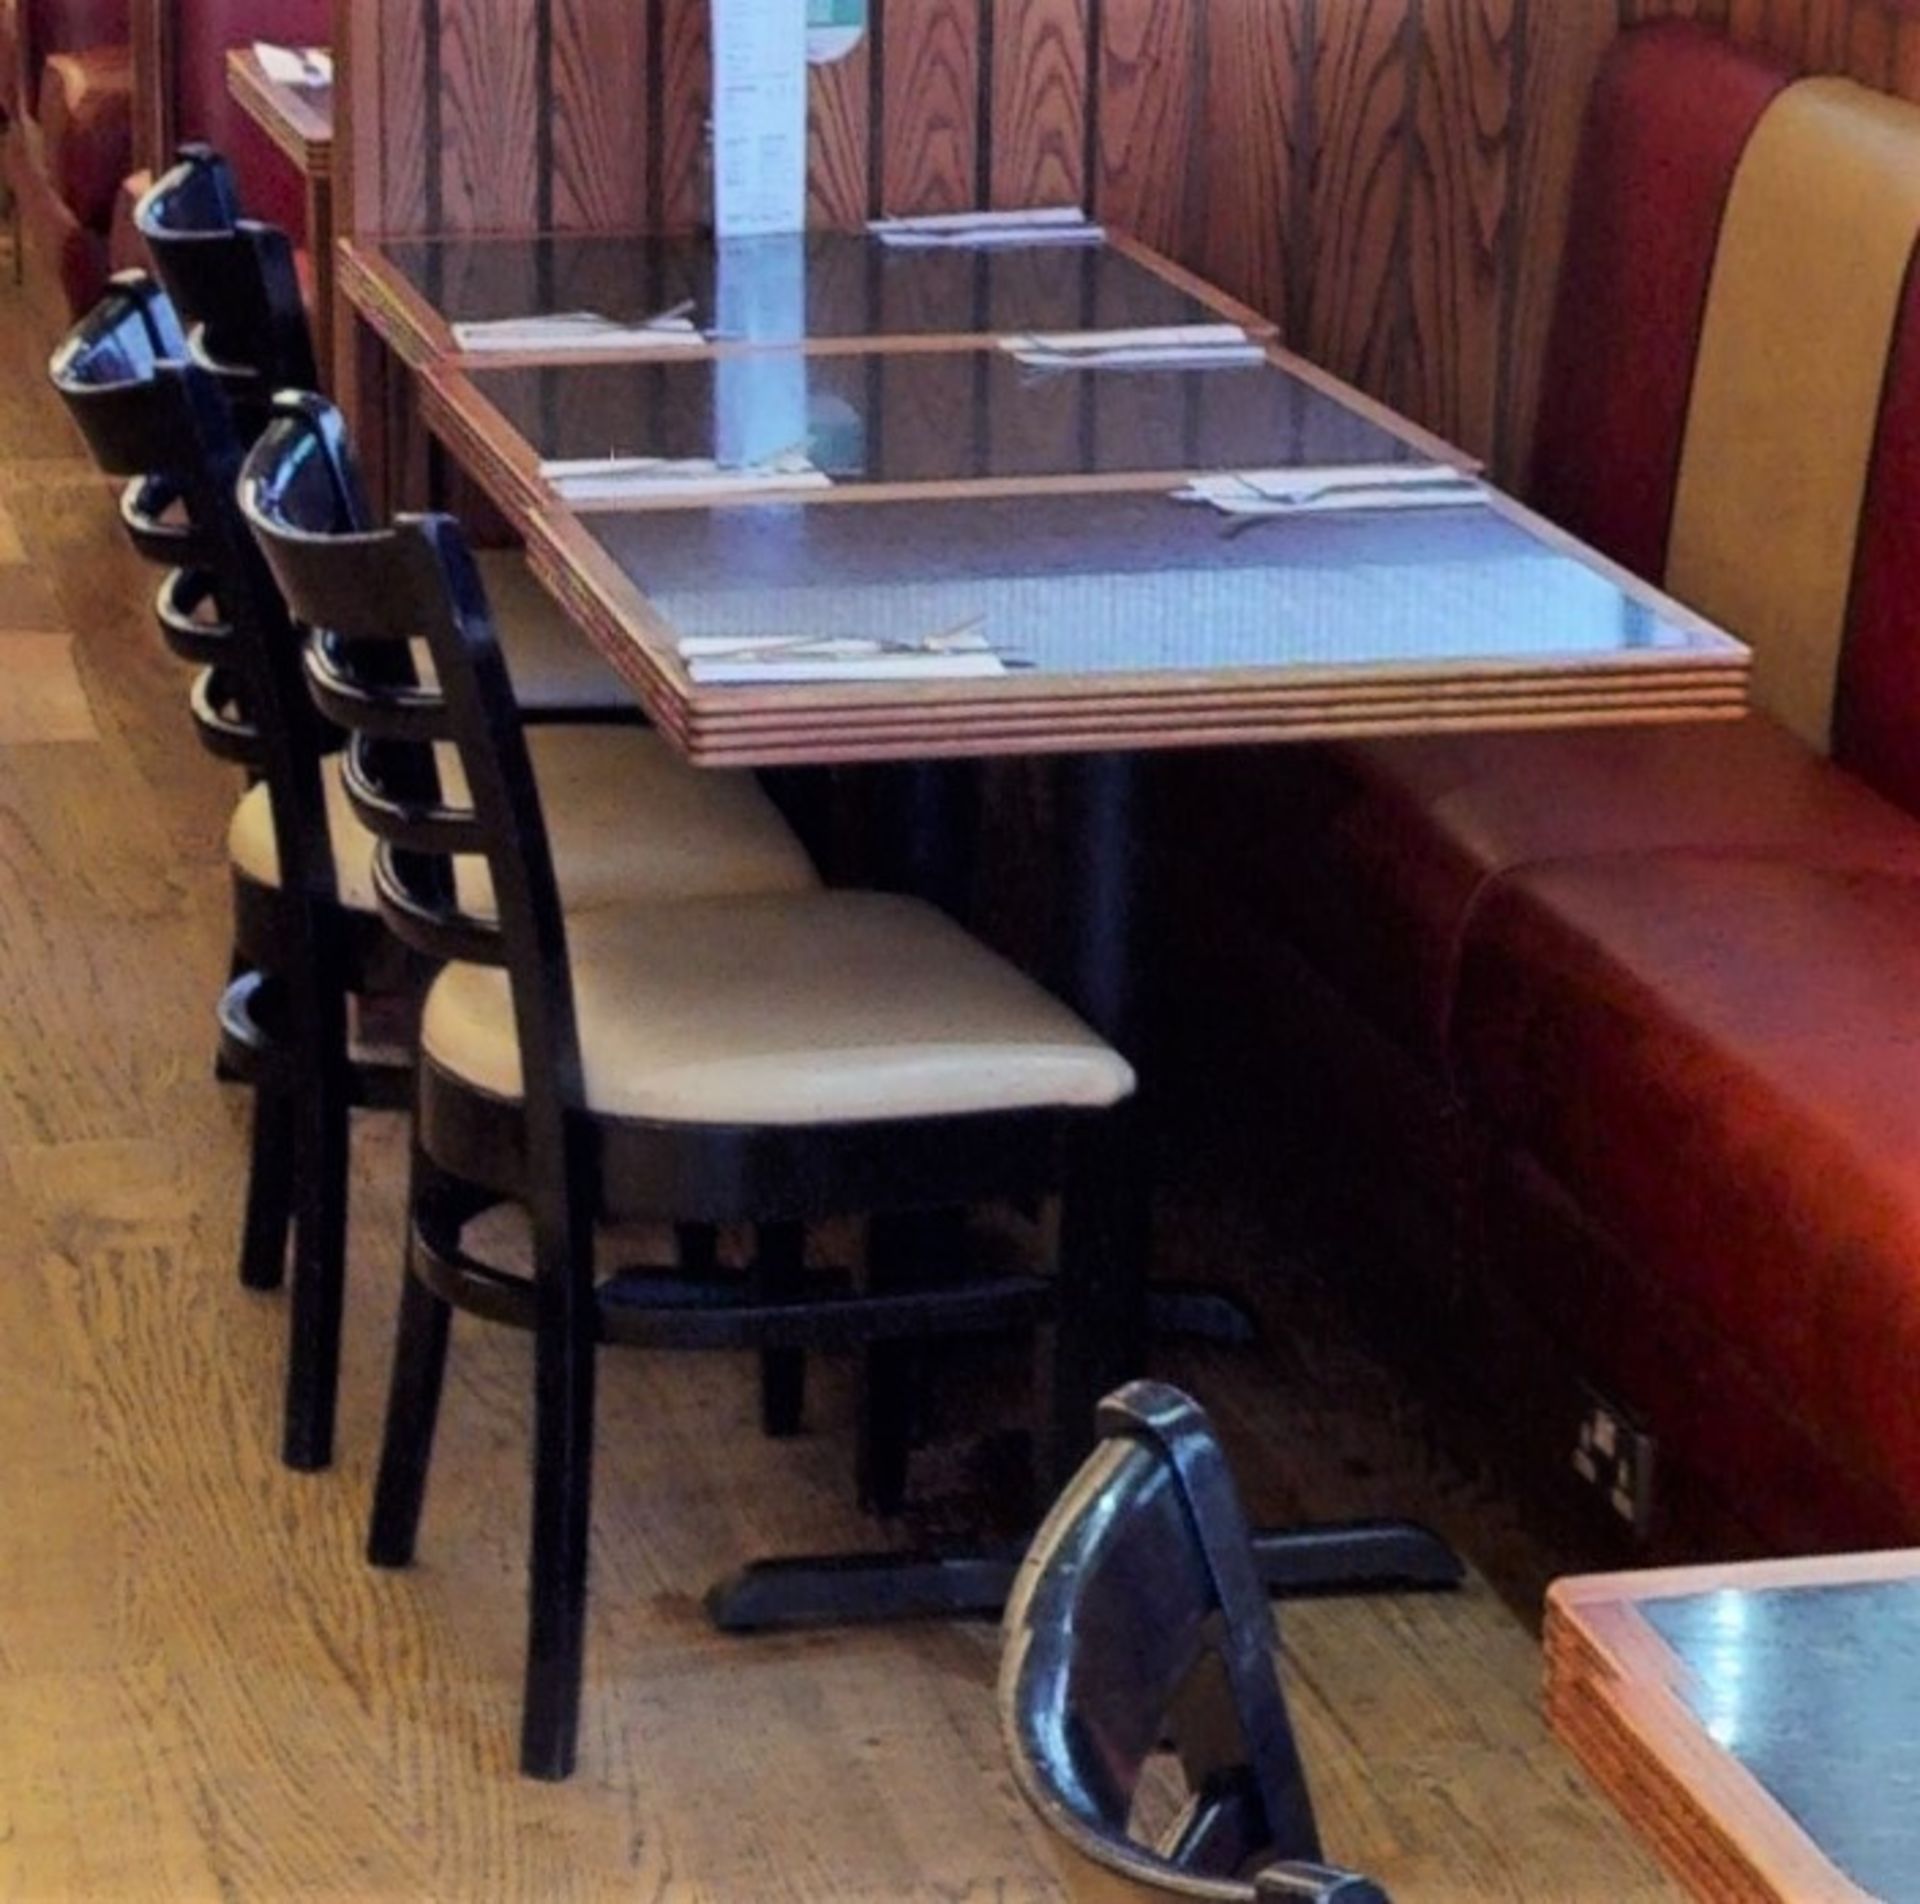 3 x Restaurant Tables With Granite Style Surface, Wooden Edging, Cast Iron Bases - Seats 2 Persons - Image 3 of 4